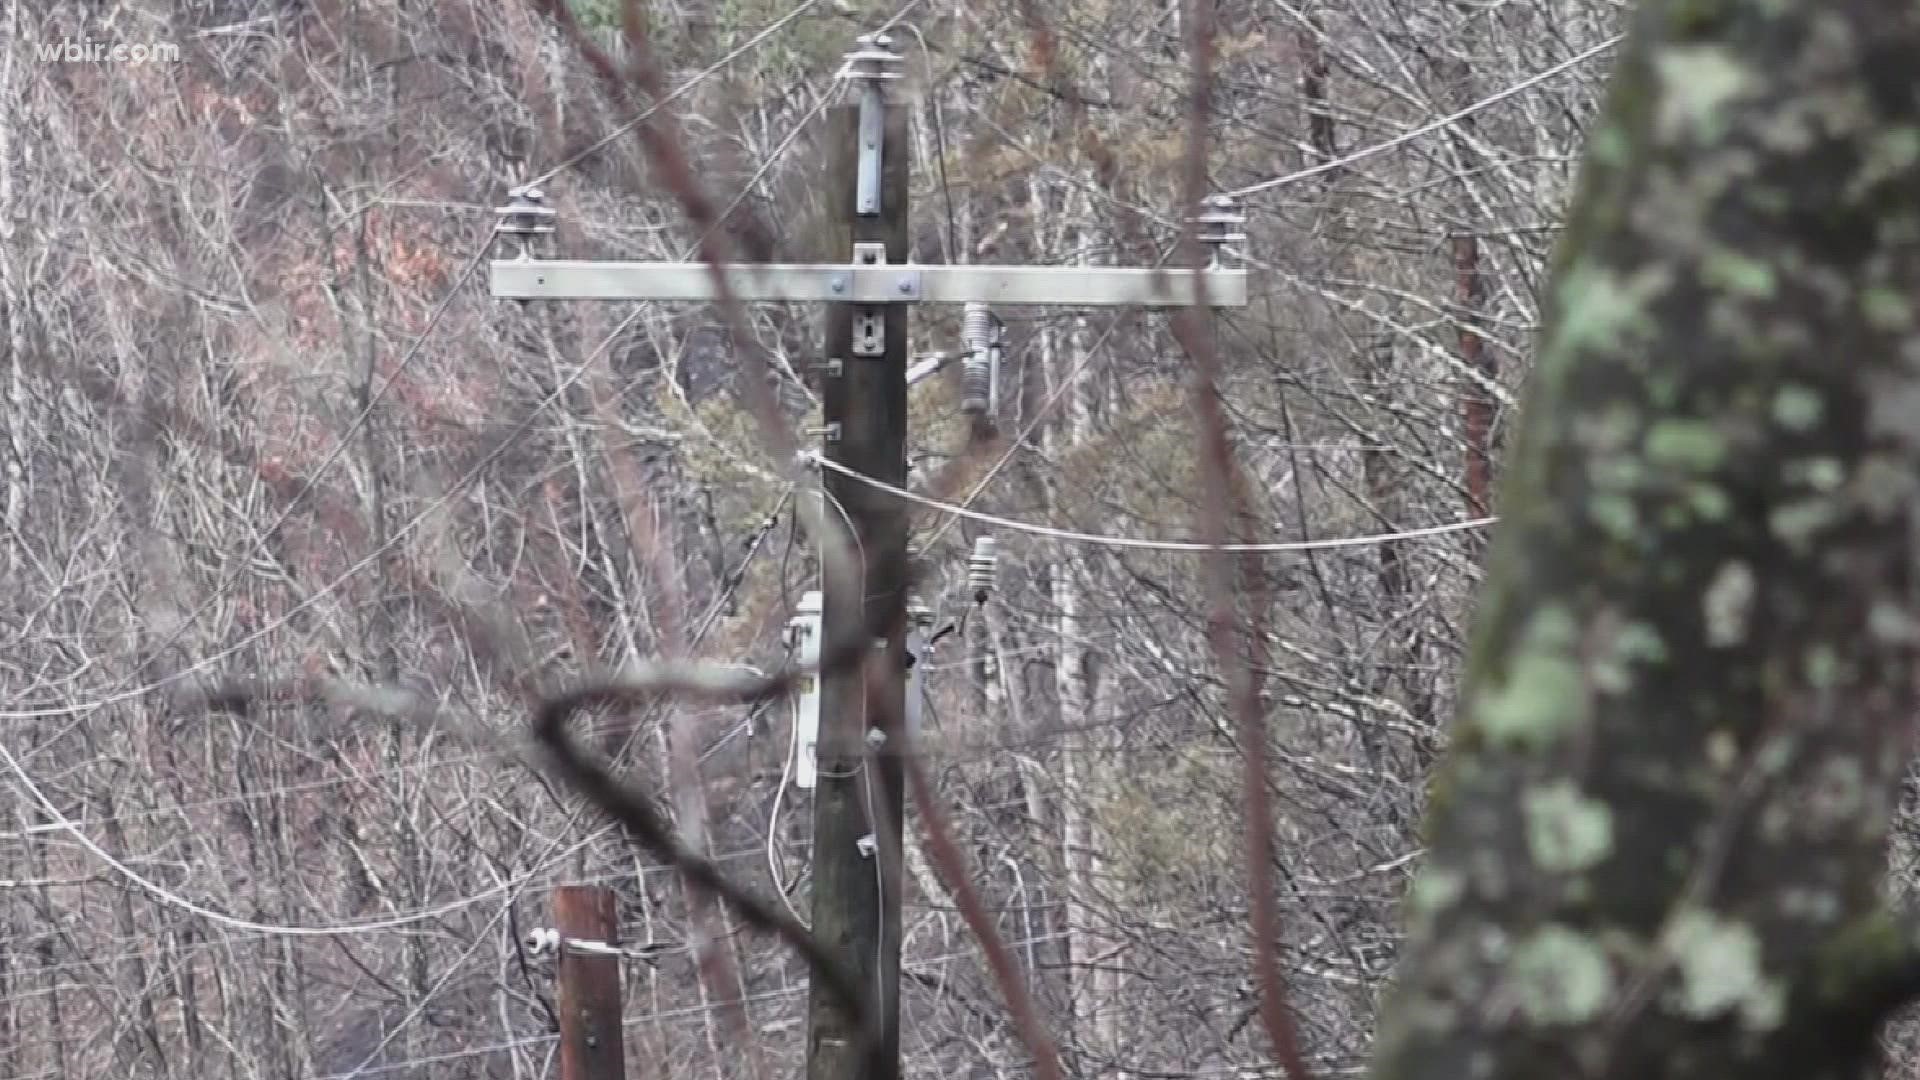 The company said it spends around $6 million per year to trim trees around power lines and said it doesn't have the resources to bury power lines.